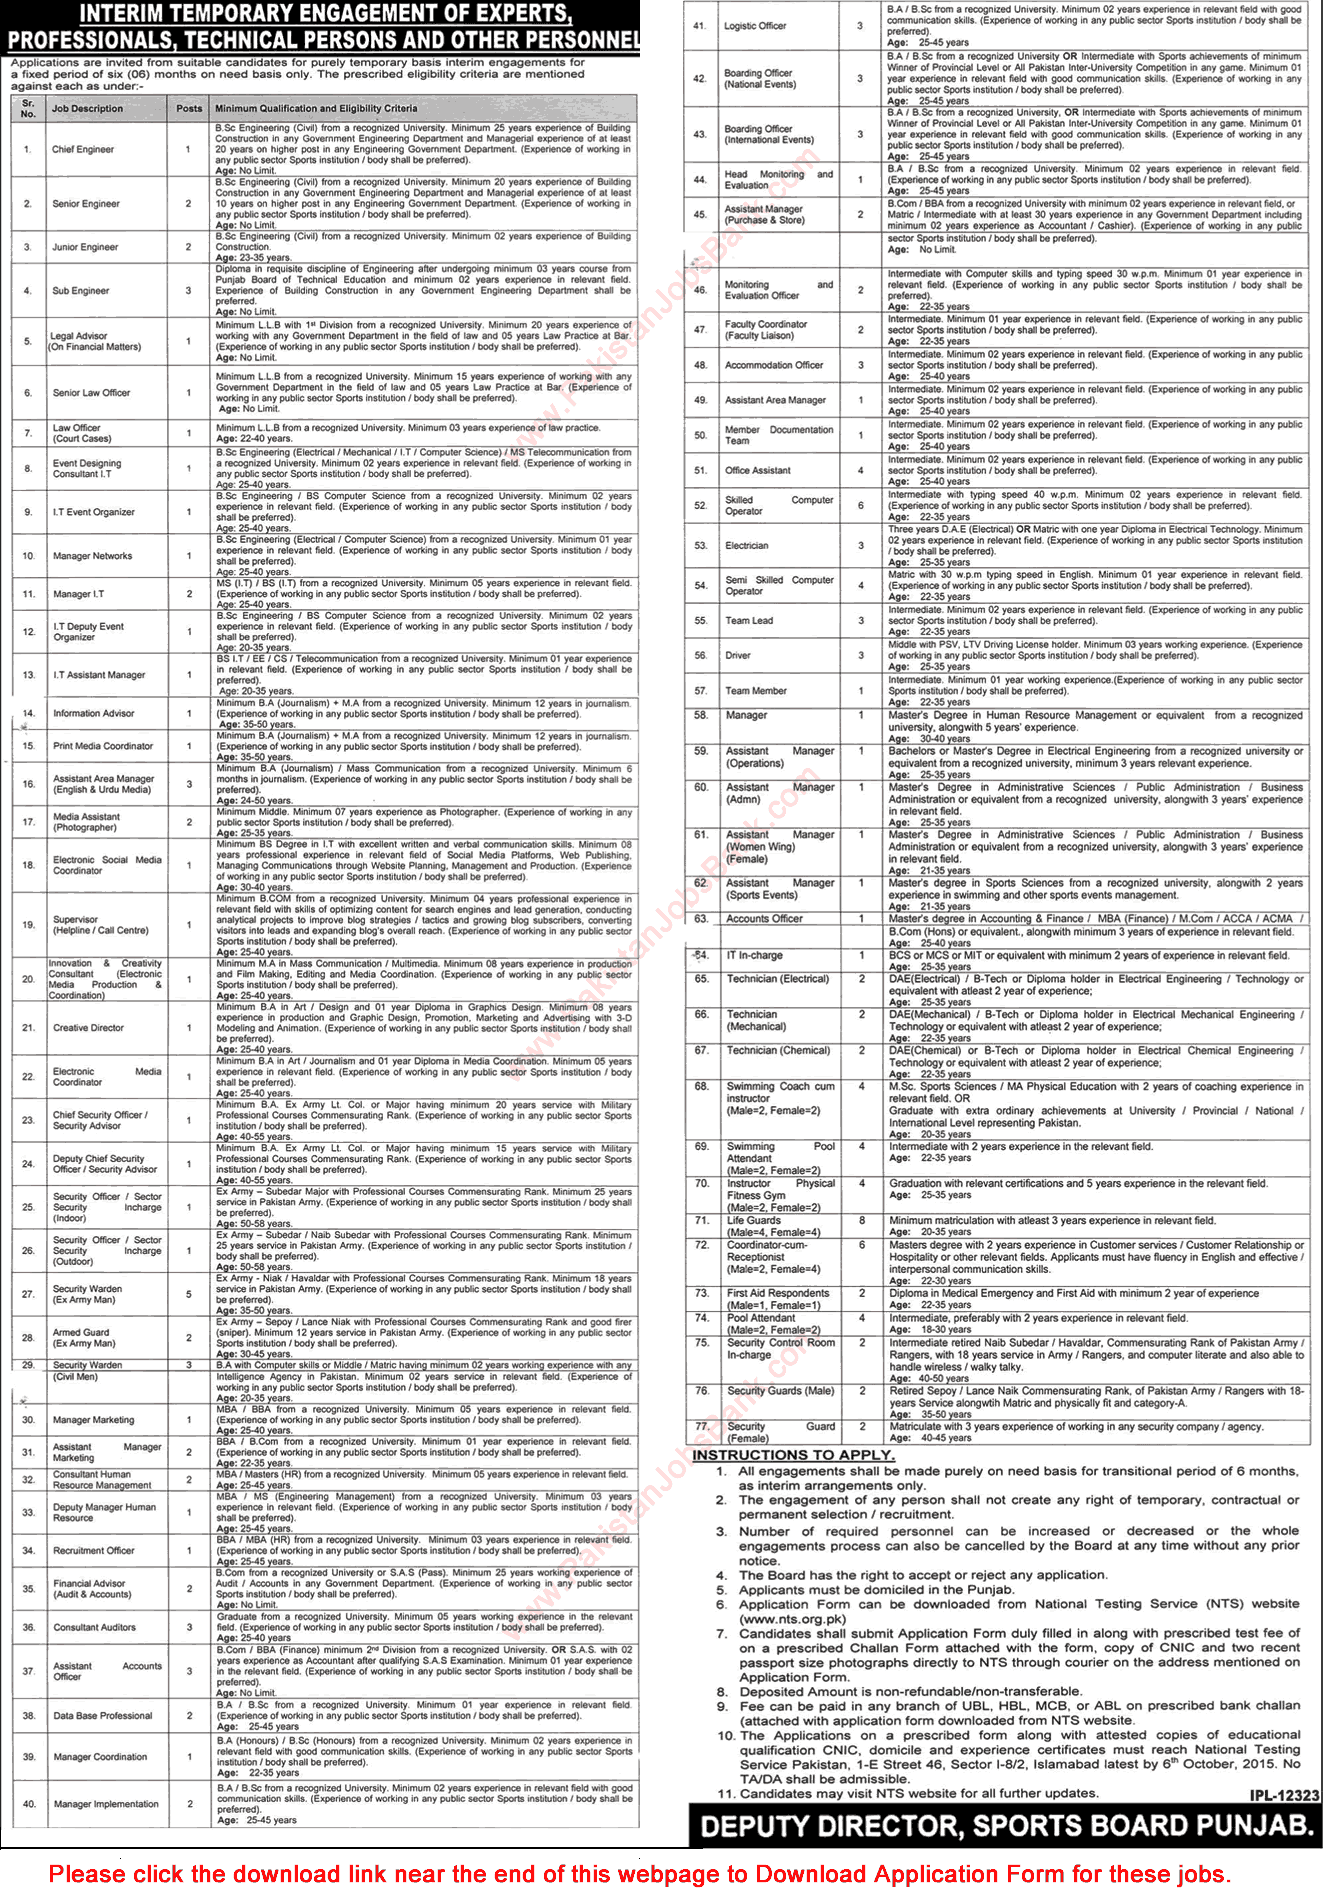 Sports Board Punjab Jobs 2015 September NTS Application Form Professionals & Technical Personnel